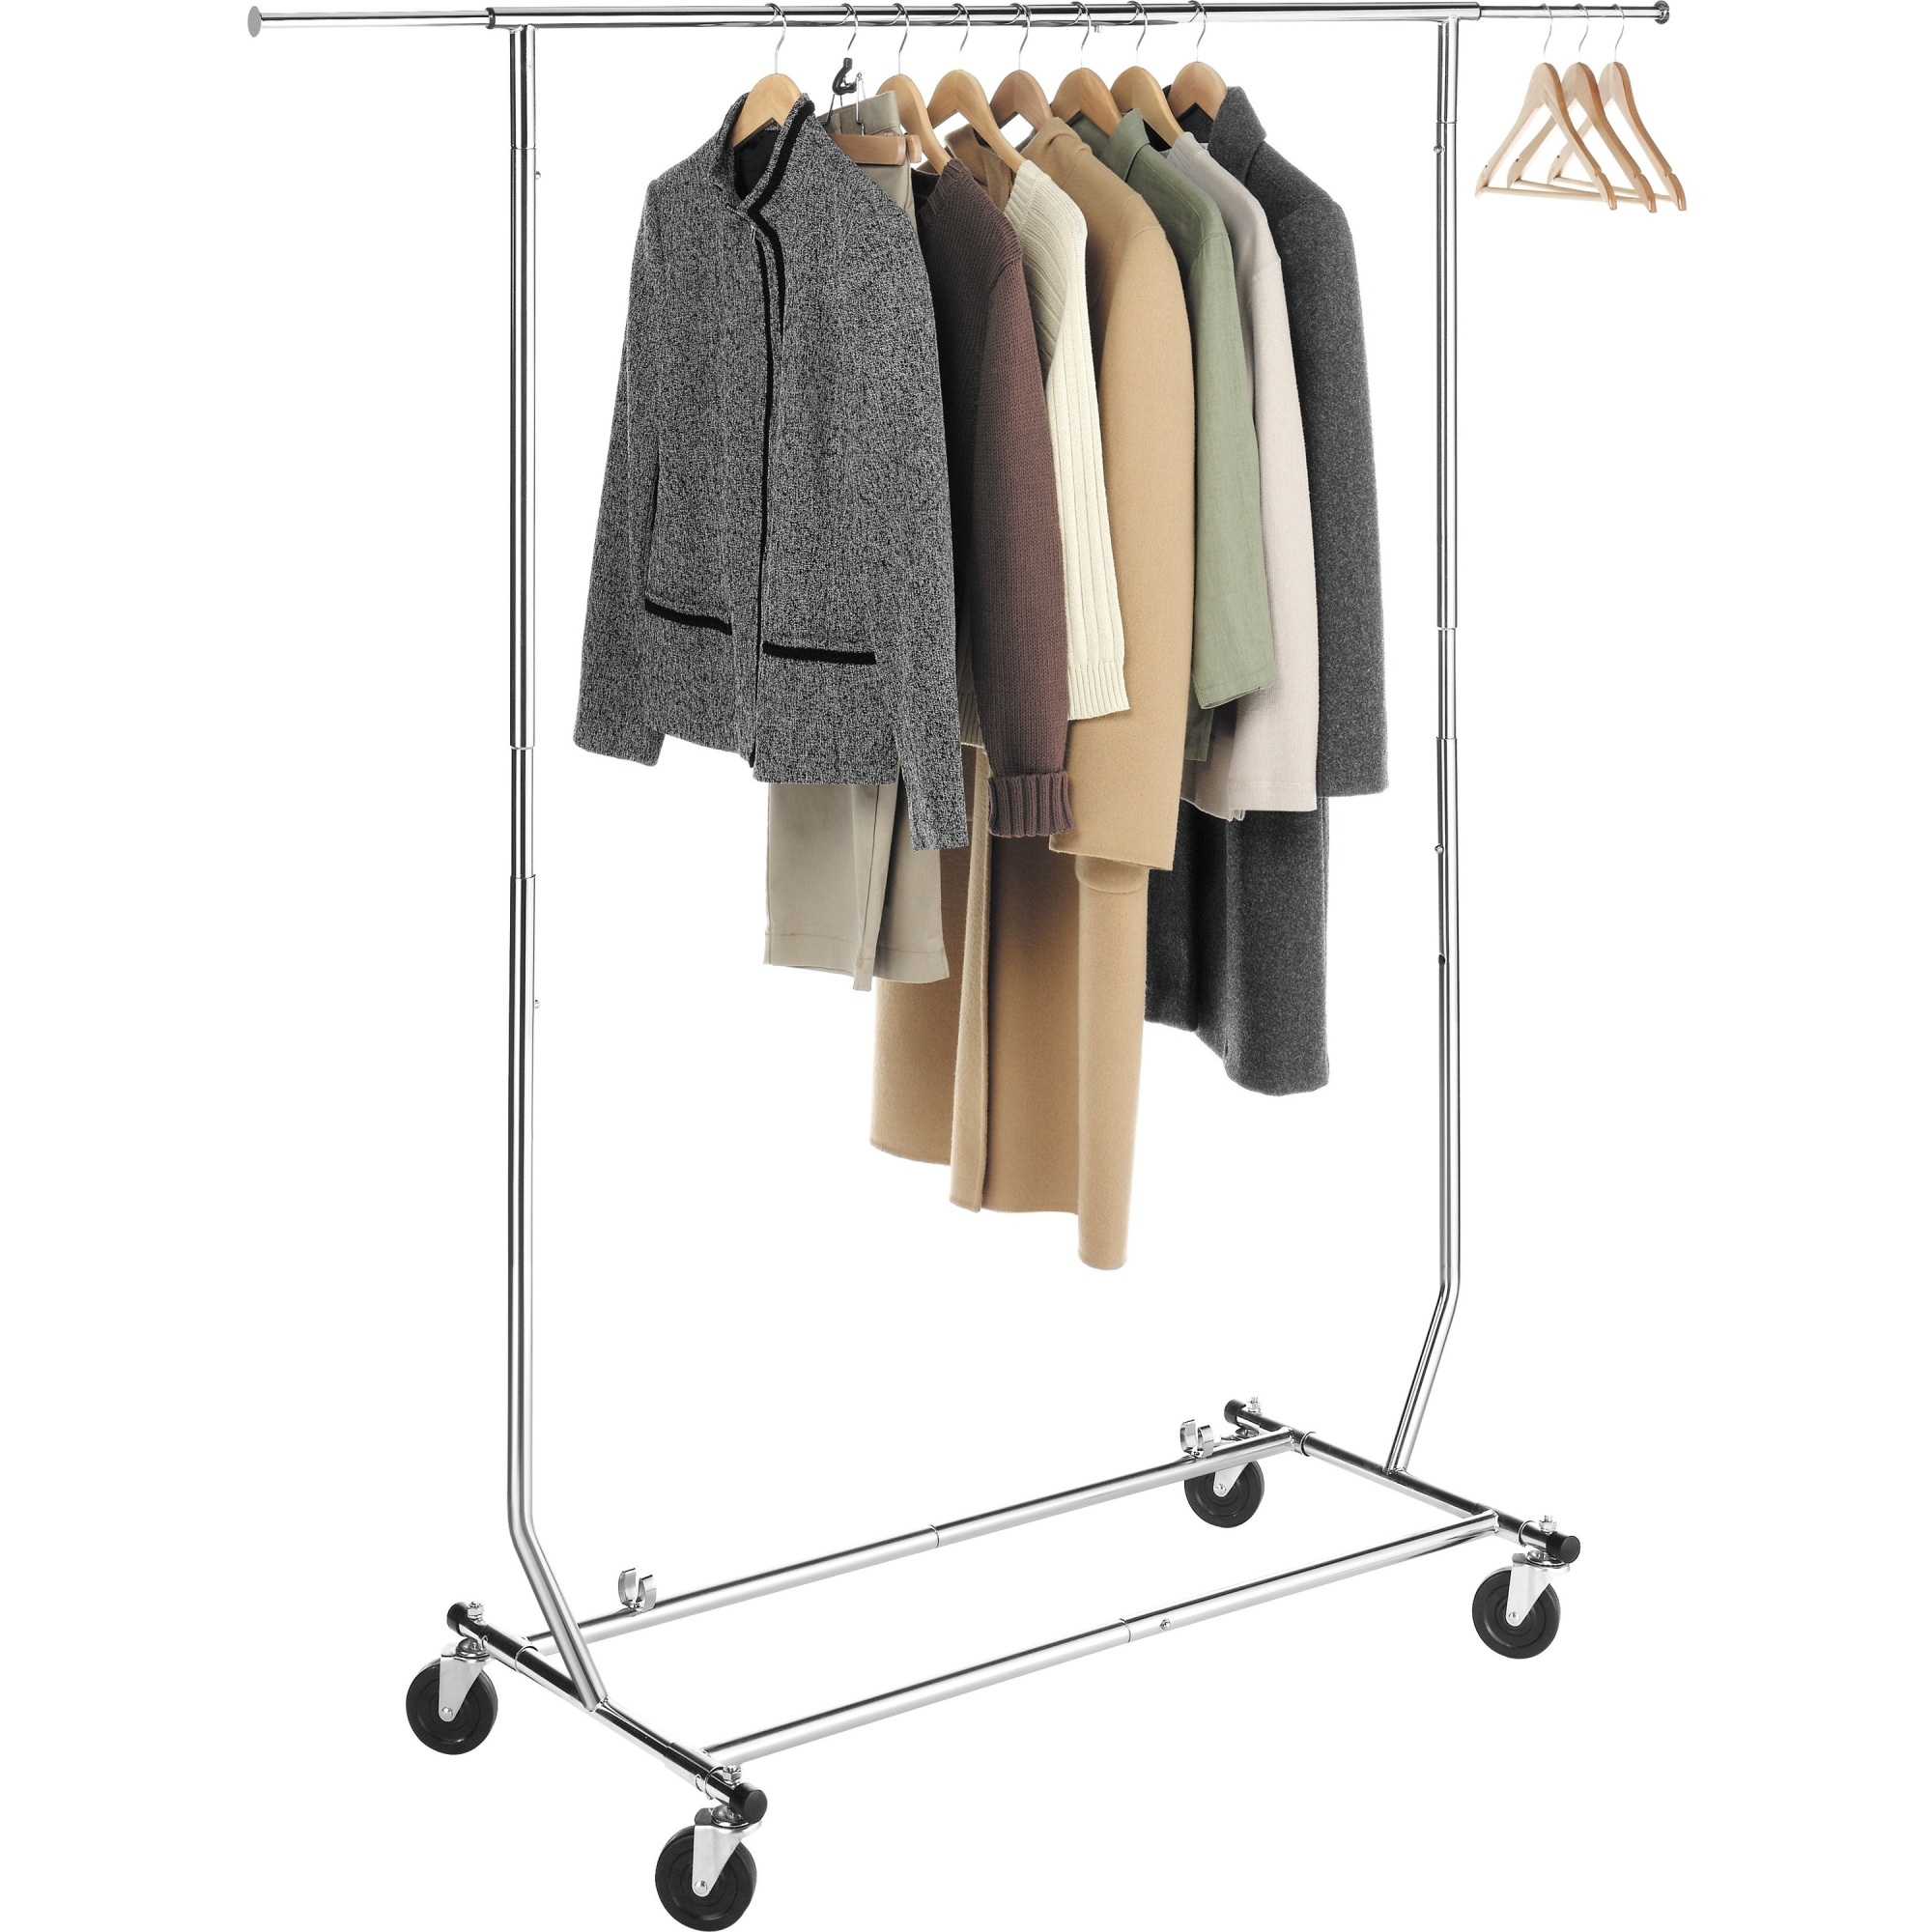 Whitmor Adjustable Rolling Garment Rack - Collapsible - Chrome - 22" x 51" x 71.25" - image 1 of 7